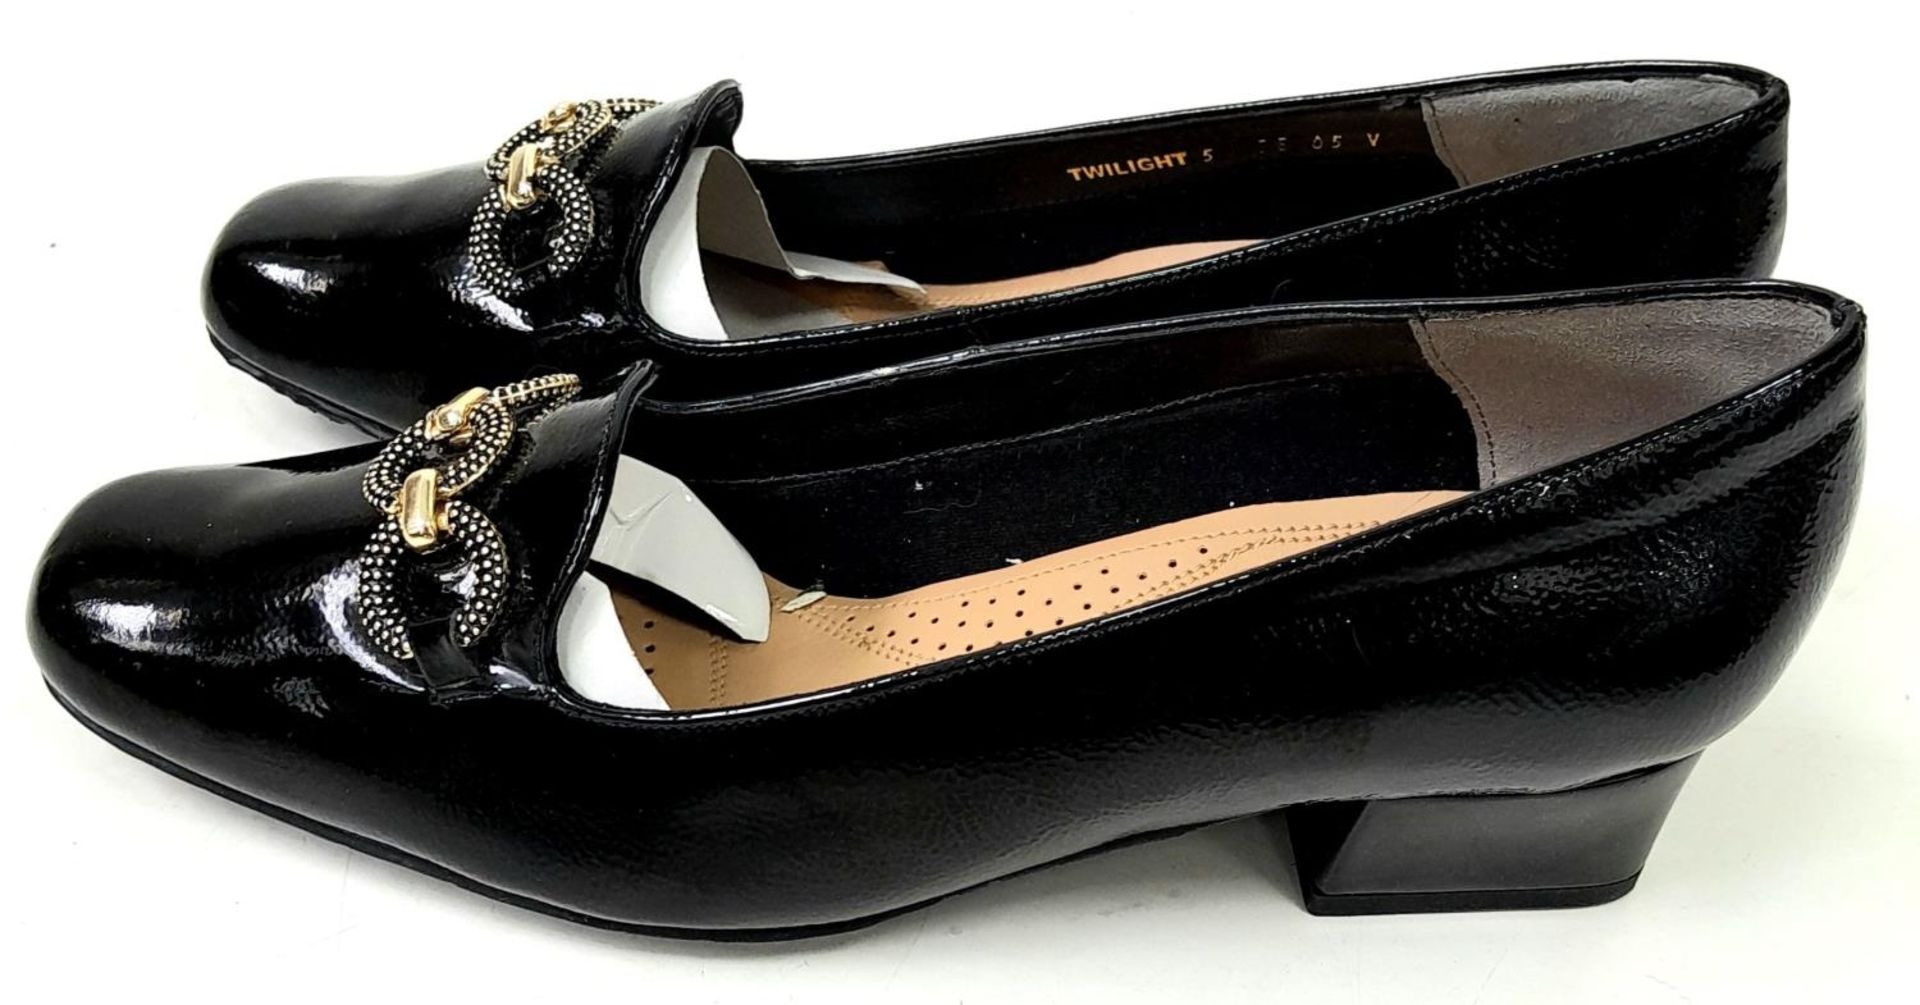 An Unused pair of "Twilight" lacquered ladies shoes by Van Dal, Size 5 ,1.5" heel. In box. - Bild 4 aus 10